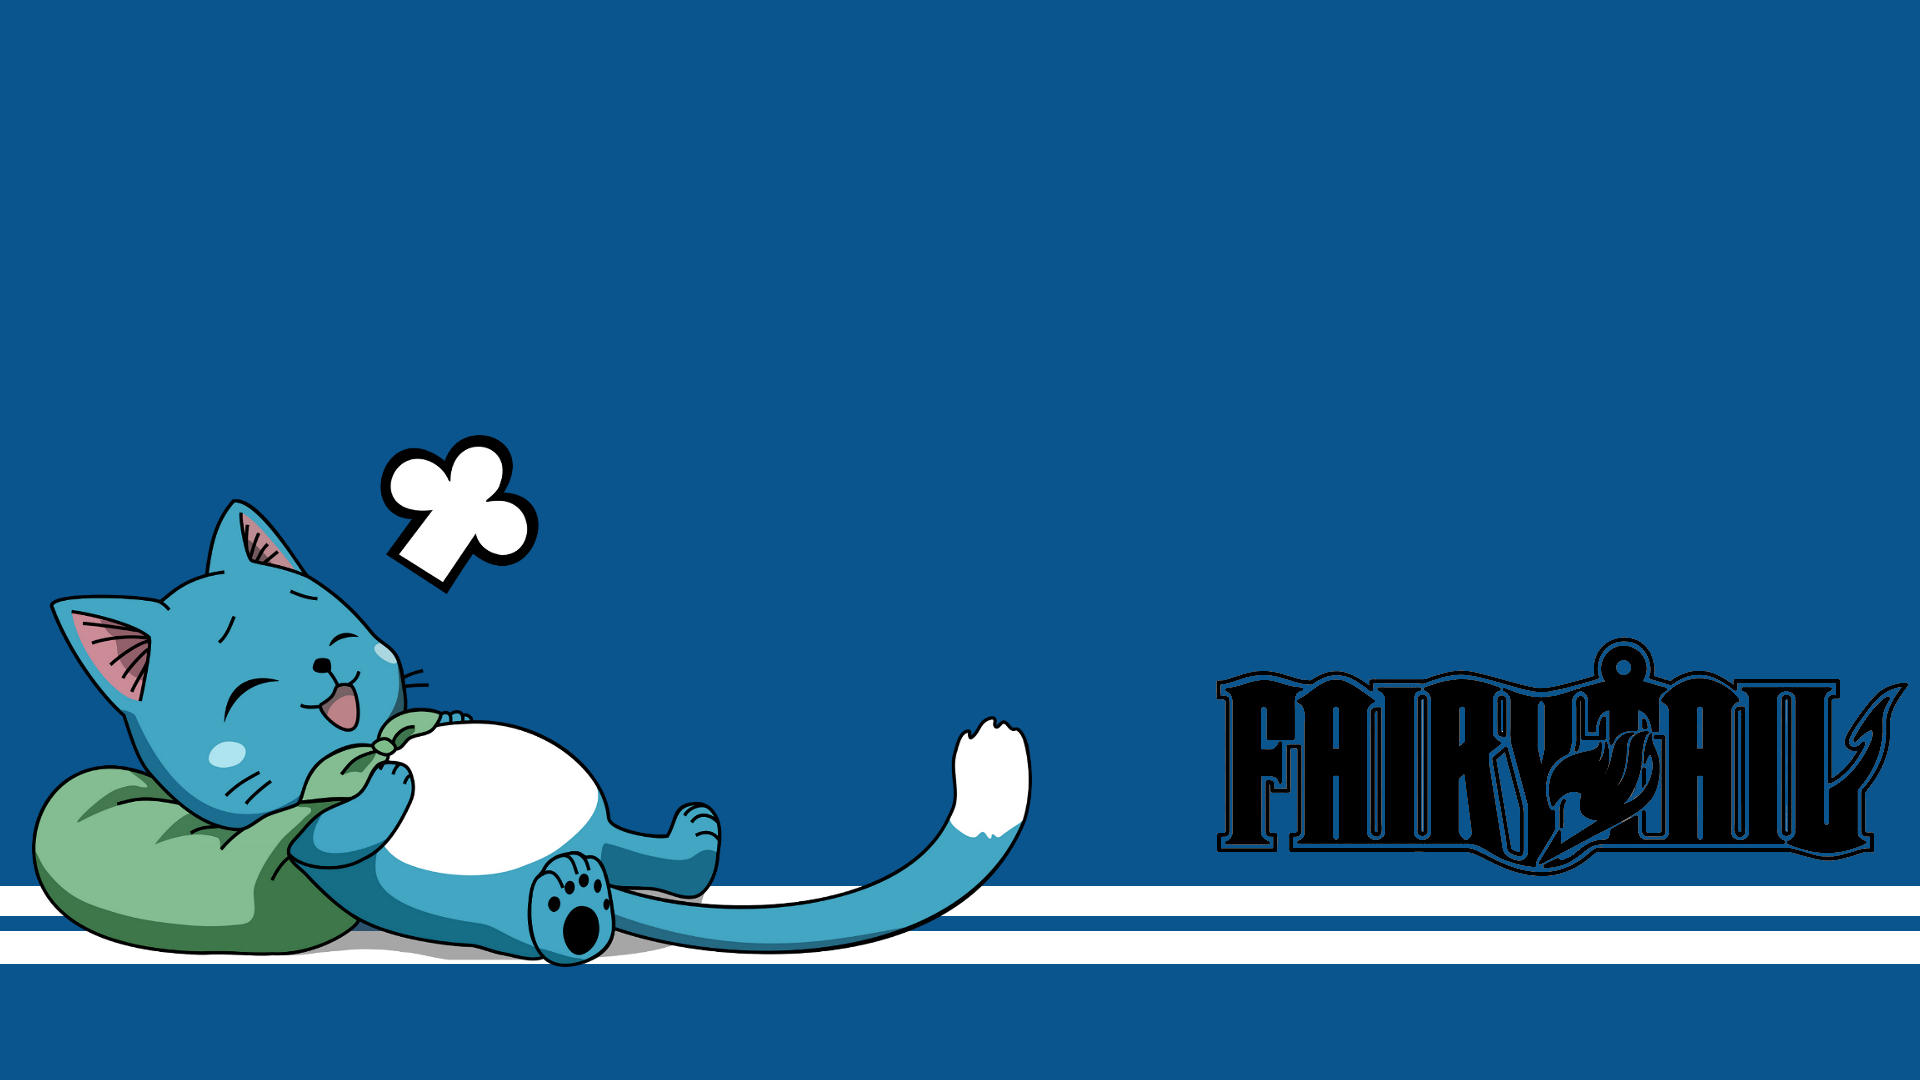 Wallpapers Fairy Tail Anime Image #318740 Download